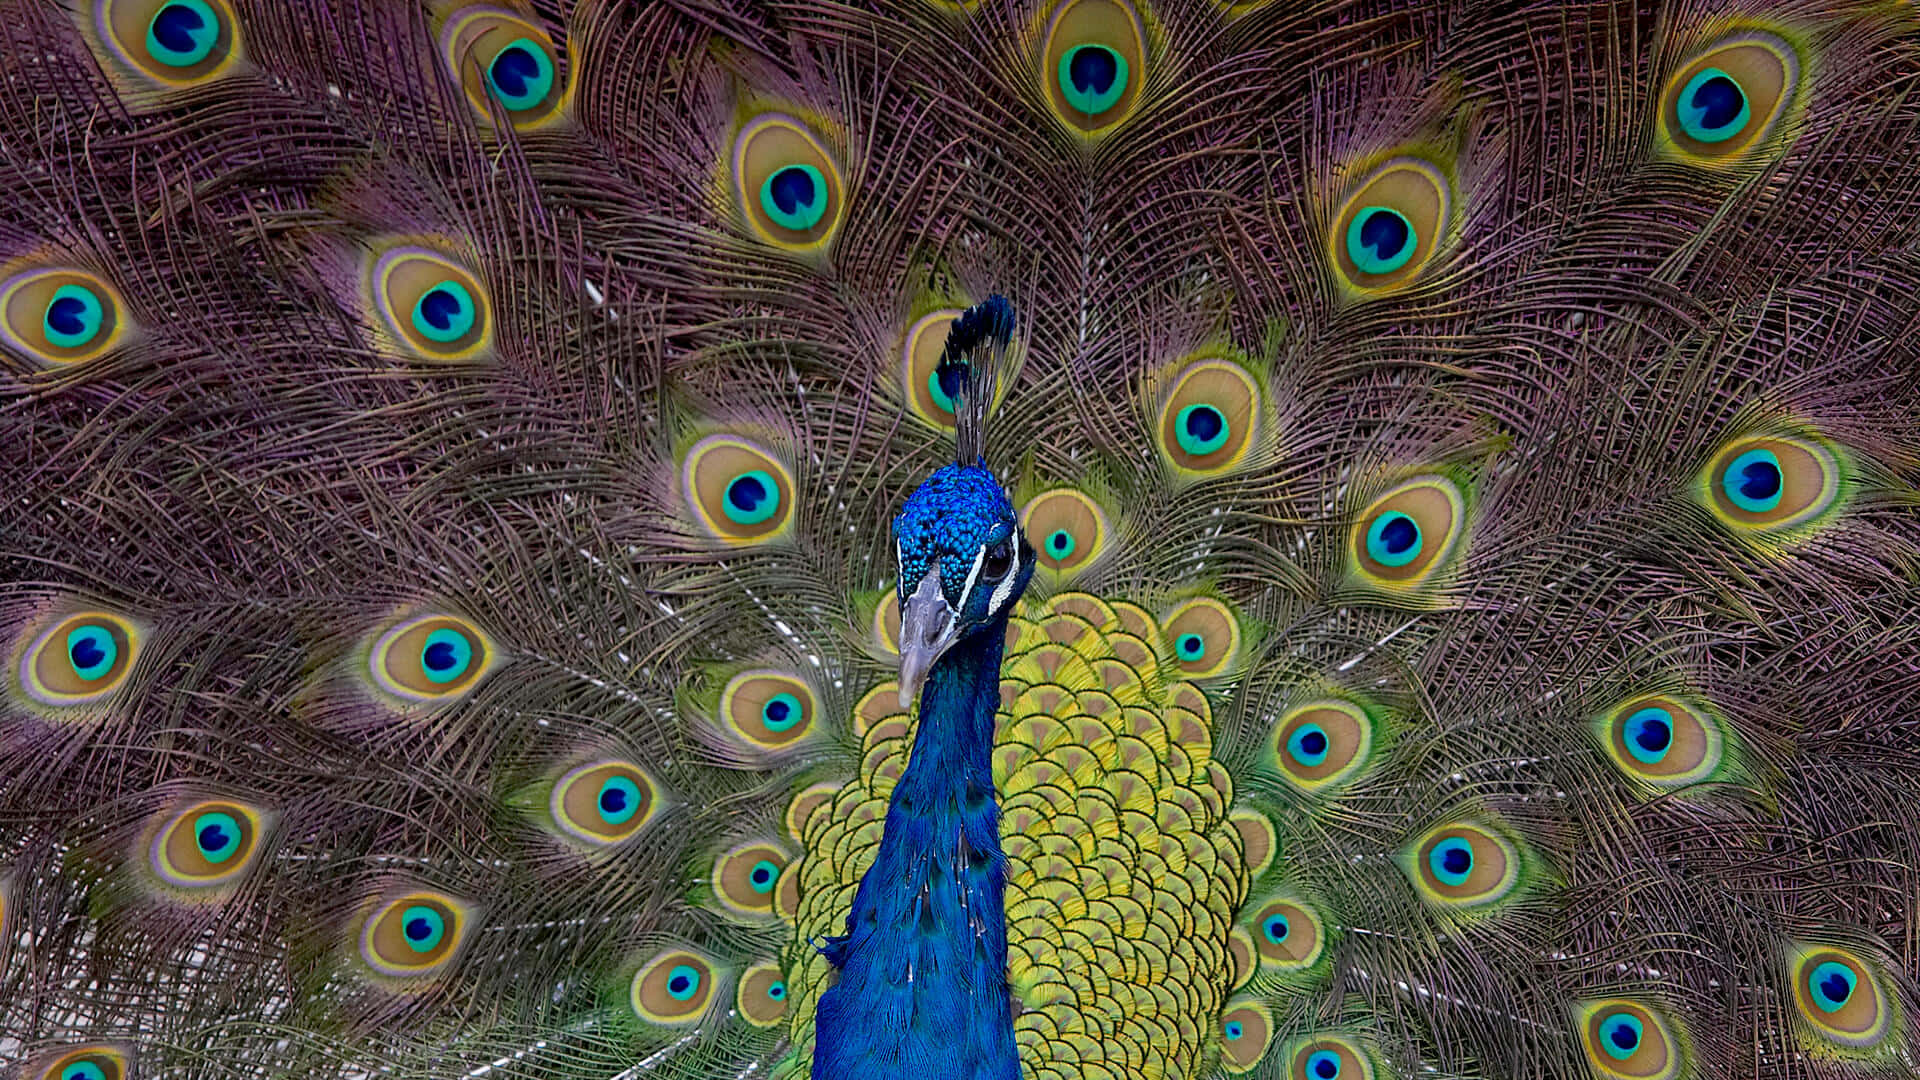 A proud peacock displays its beautiful feathers.